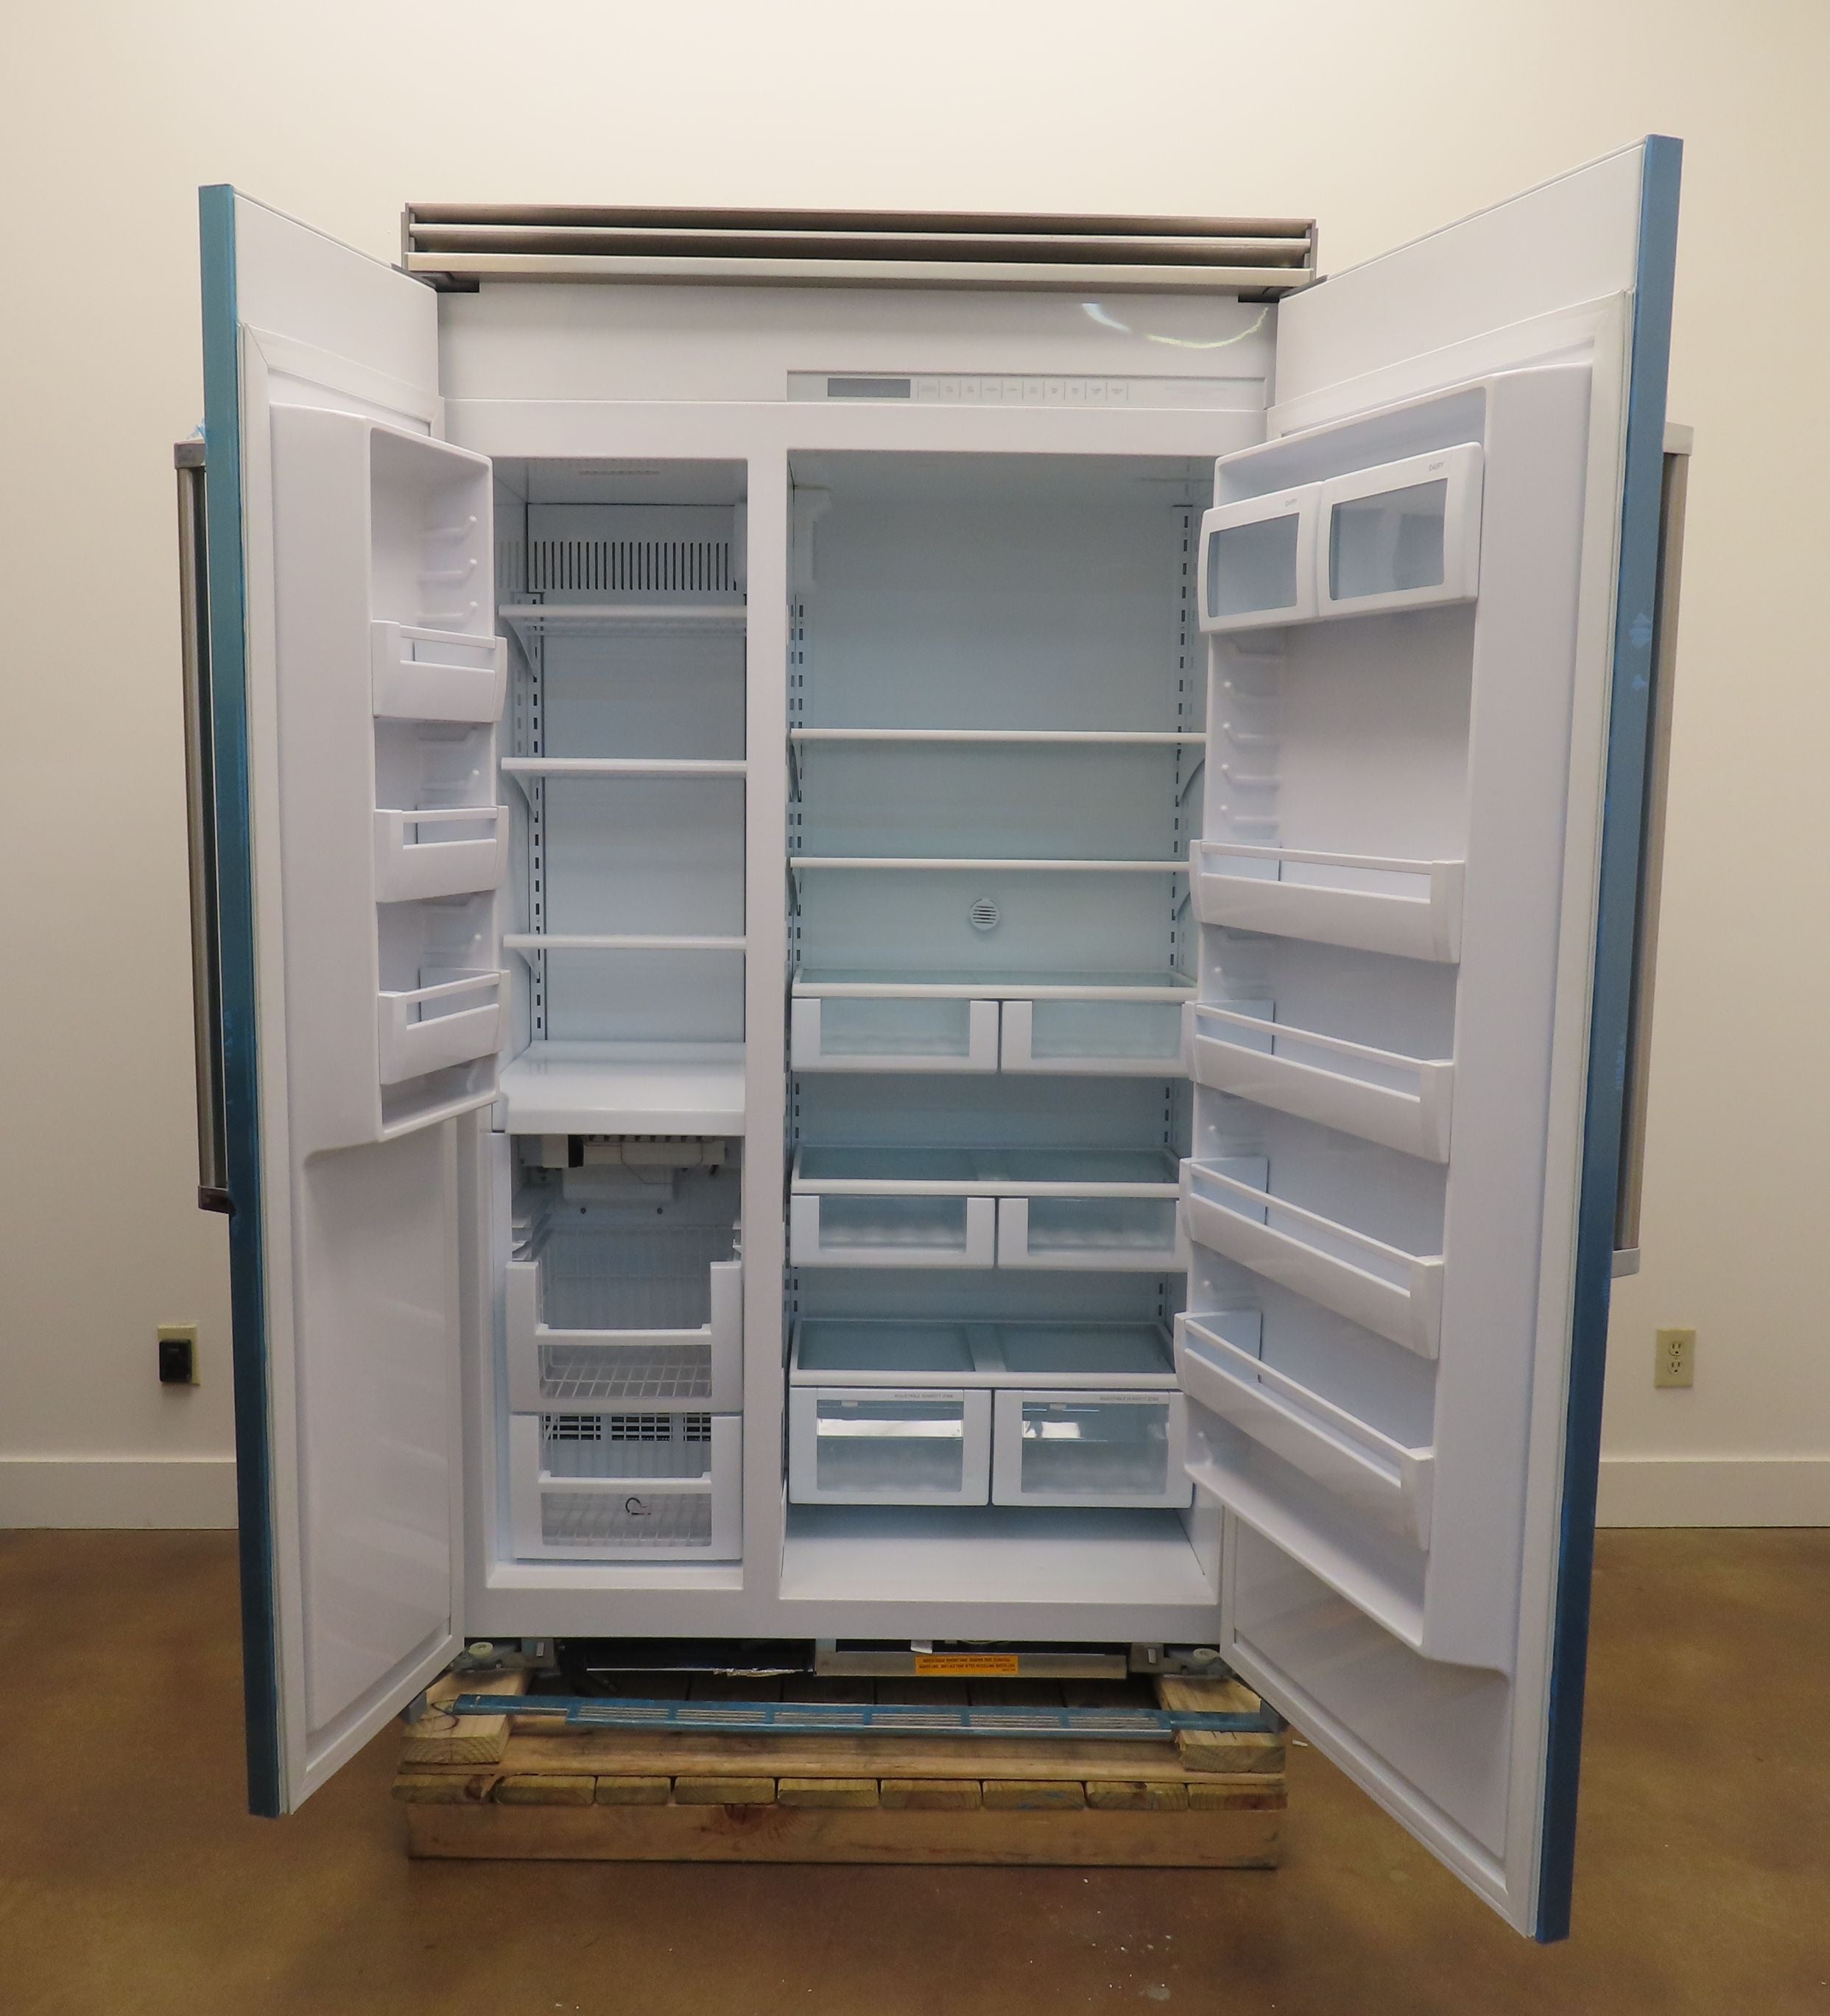 Viking Professional 5 Series VCSB5483SS 48" Built-in Refrigerator 2023 Model